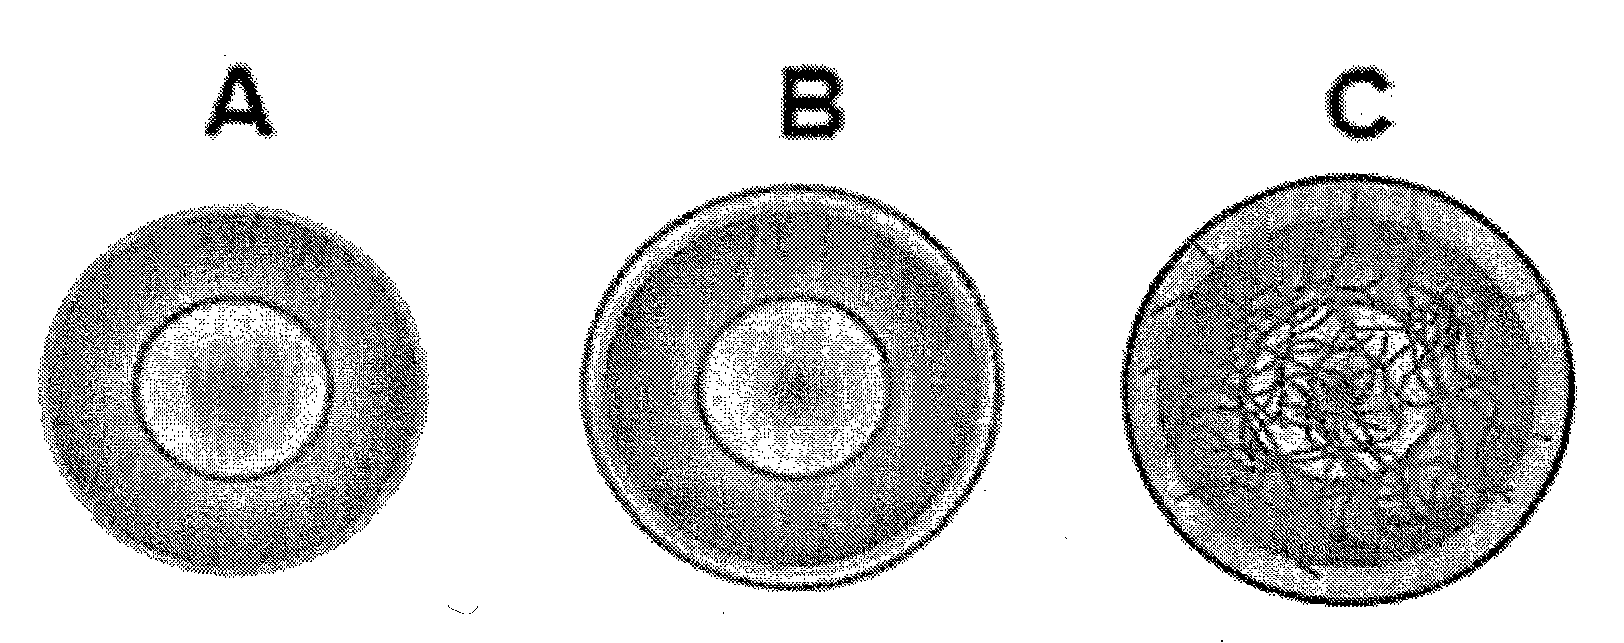 Porous hollow silica n anop articles, preparation method of the silica nanoparticles, and drug carriers and pharmaceutical composition comprising the silica nanoparticles